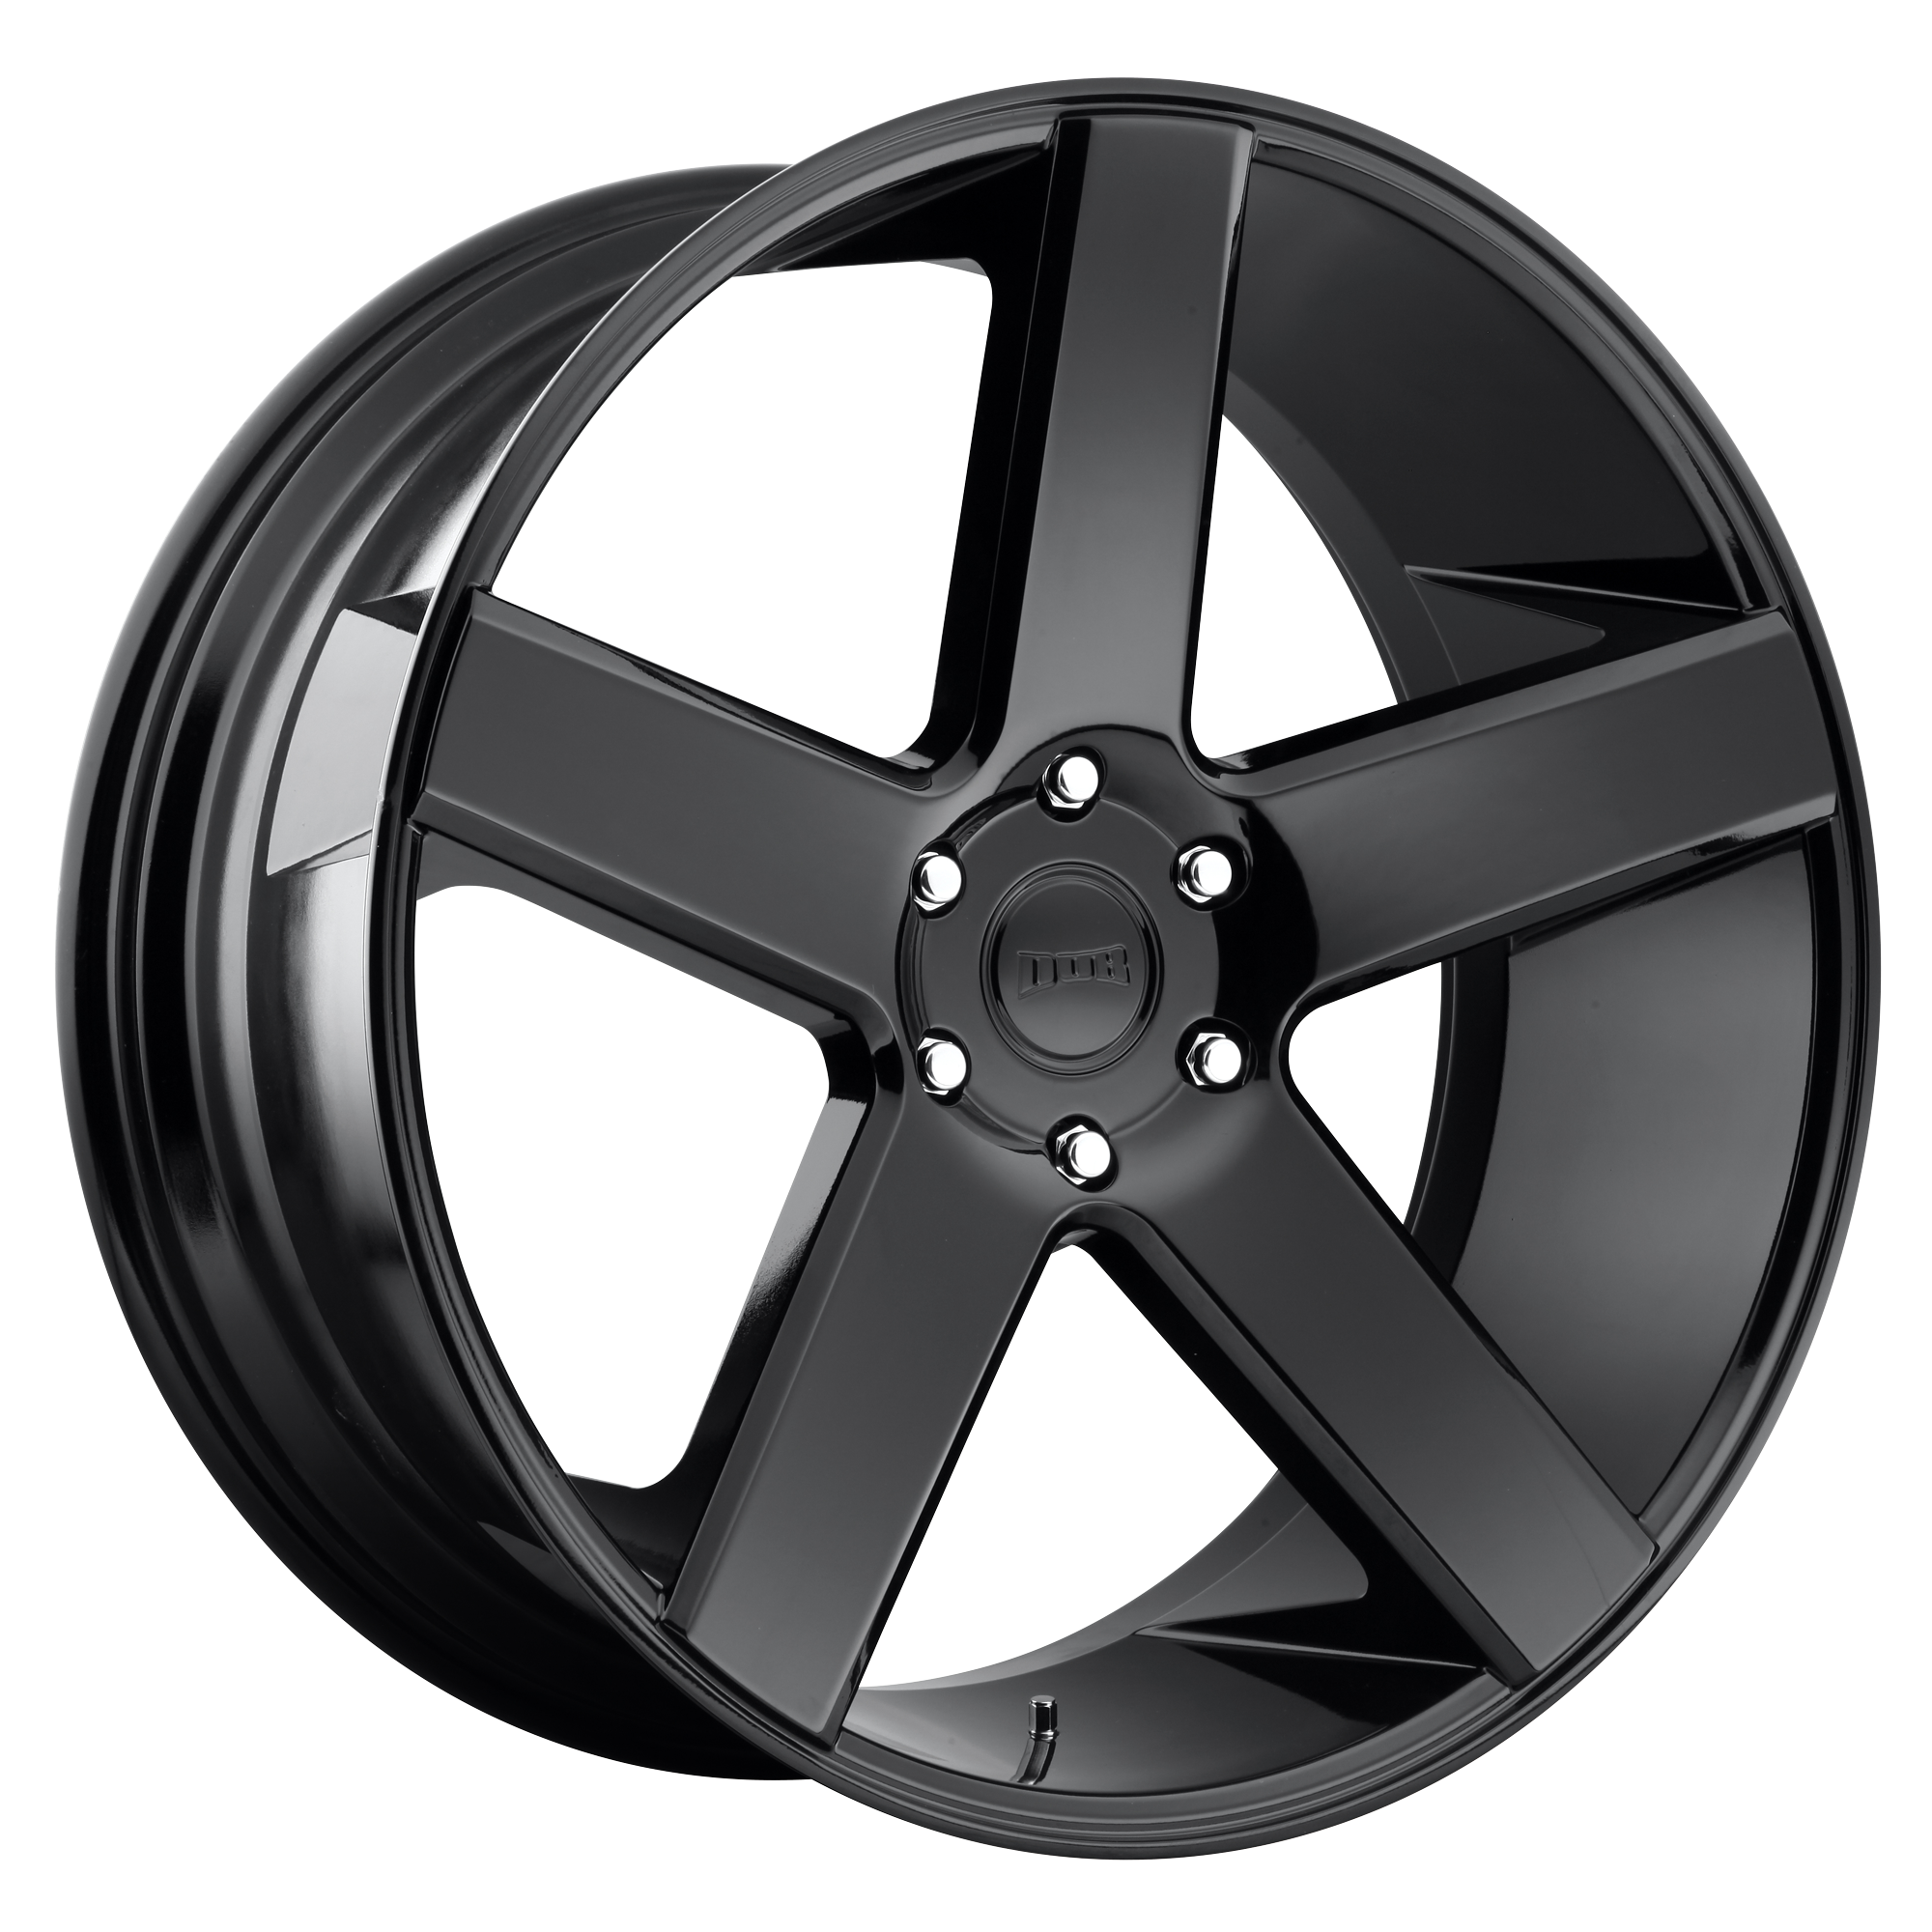 BALLER 20x9.5 6x135.00 GLOSS BLACK (30 mm) - Tires and Engine Performance